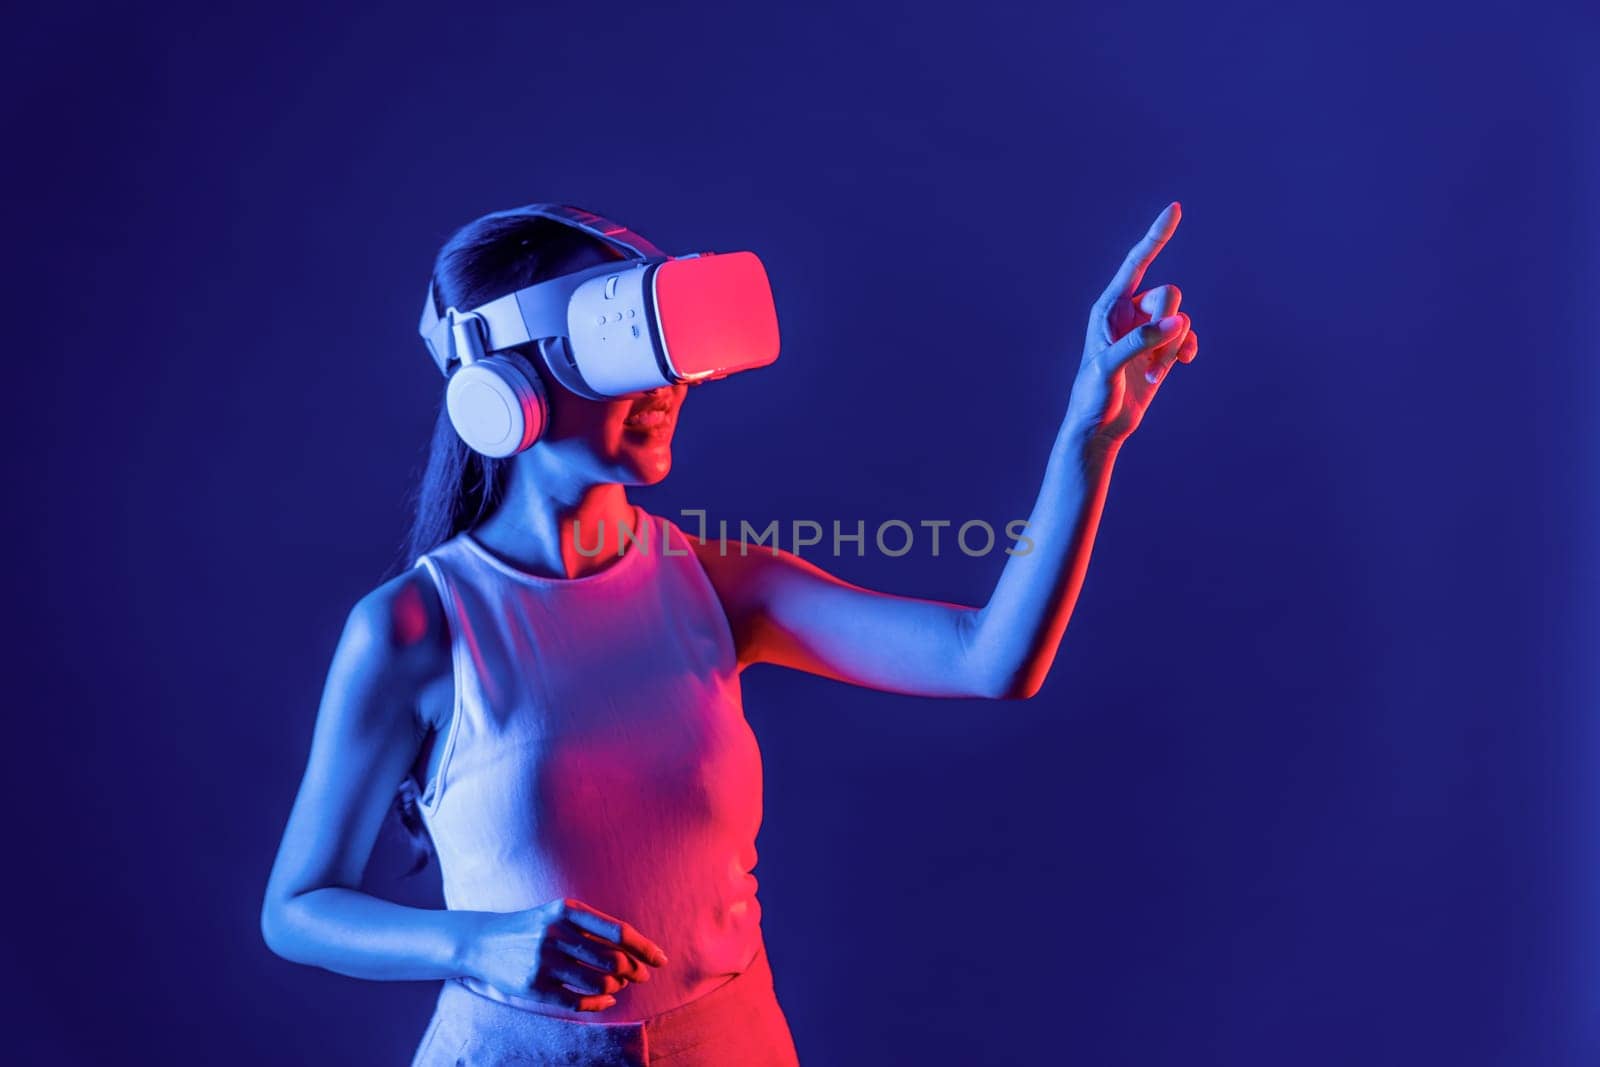 Smart female stand with surrounded by cyberpunk neon light wear VR headset connecting metaverse, futuristic cyberspace community technology. Woman using finger pointing virtual object. Hallucination.